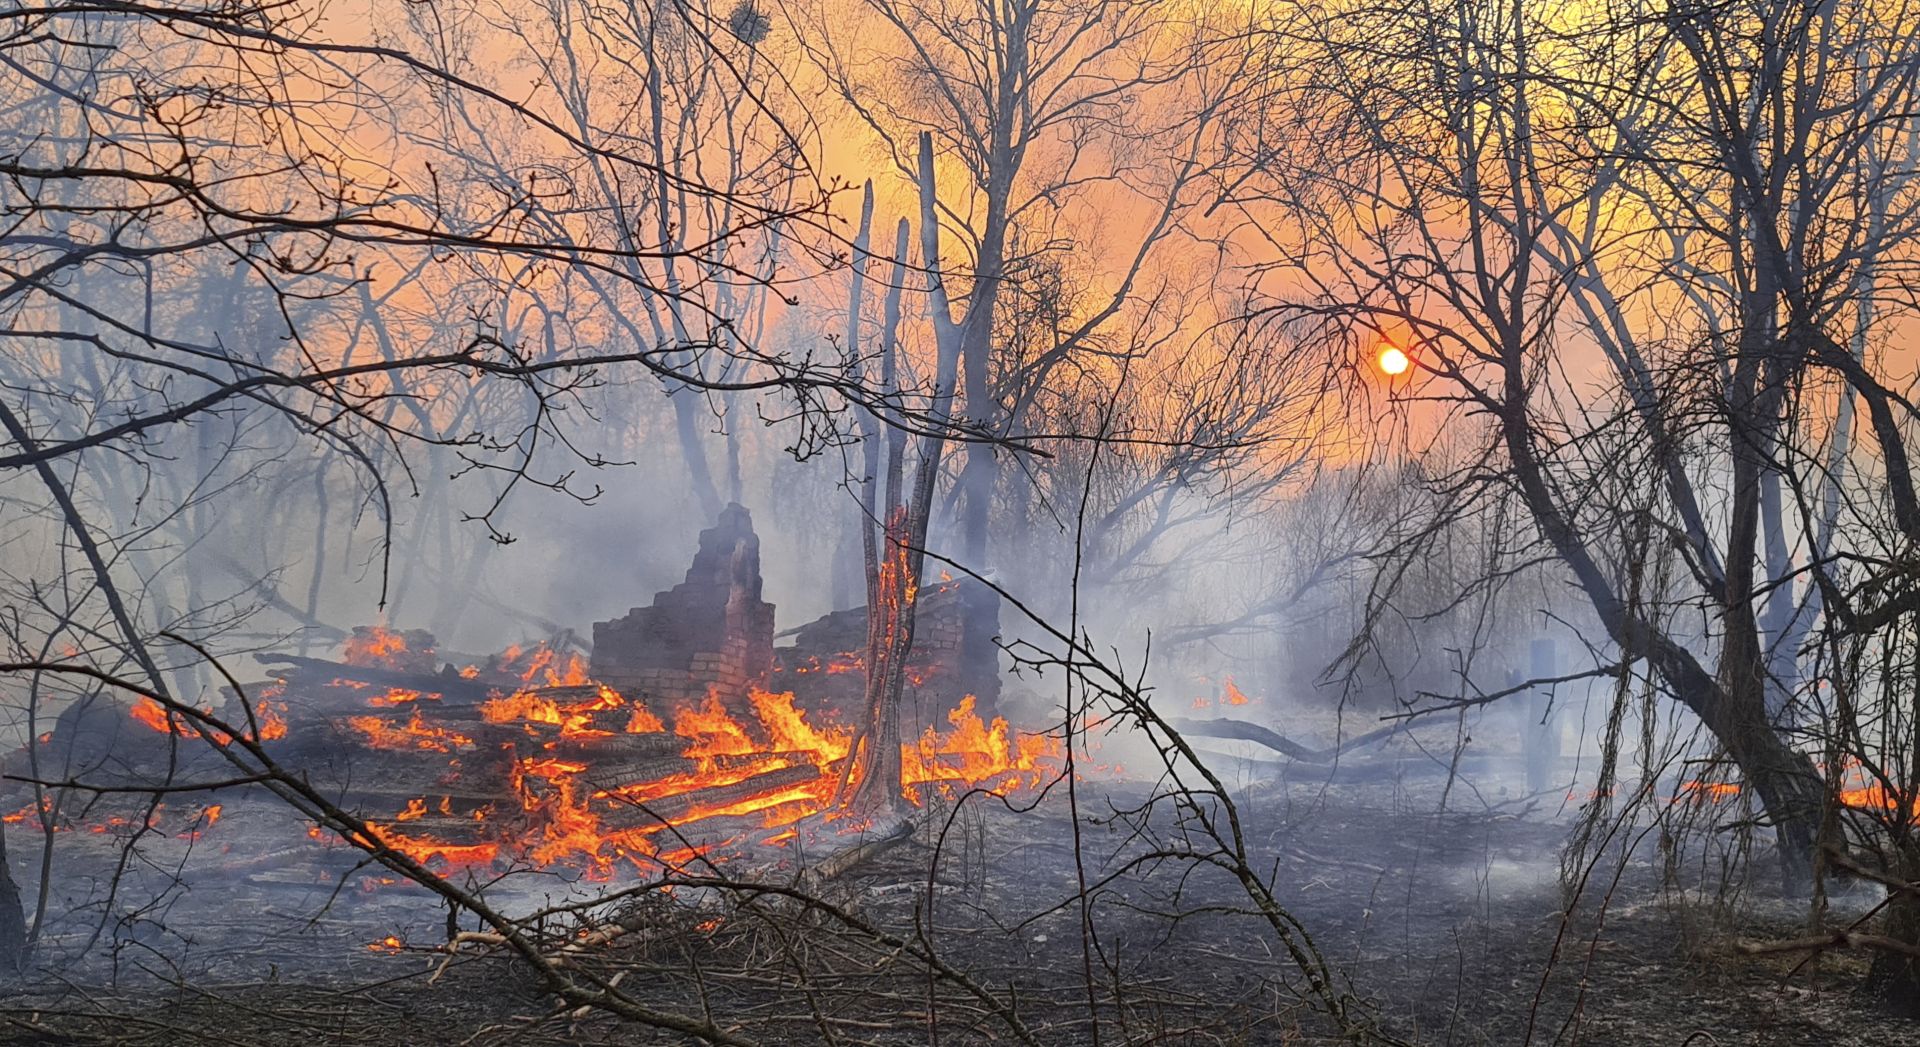 epa08348350 A forest fire burns near the village of Volodymyrivka, in the exclusion zone around the Chernobyl nuclear power plant, Ukraine, 05 April 2020 (issued 07 April 2020). Ukraine's State Emergency Service said firefighters and rescue teams continued to put out fires at two sites near Rahivka, adding that radiation levels in the capital, Kyiv (Kiev), and Kyiv region is within a normal range. The total area affected by the fire near Rahivka was reported to be five hectares. The Kyiv police said they have identified on 06 April 2020 a man who allegedly started a mass fire in the uninhabited exclusion zone around the decommissioned Chornobyl nuclear plant last week. The 27-year-old resident of the Rahivka village told investigators that he had set some garbage and grass on fire for fun. The territory is a long-vacated area near where an explosion at the Chernobyl Soviet nuclear plant in April 1986 sent a plume of radioactive fallout high into the air and across swaths of Europe.  EPA/YAROSLAV YEMELIANENKO